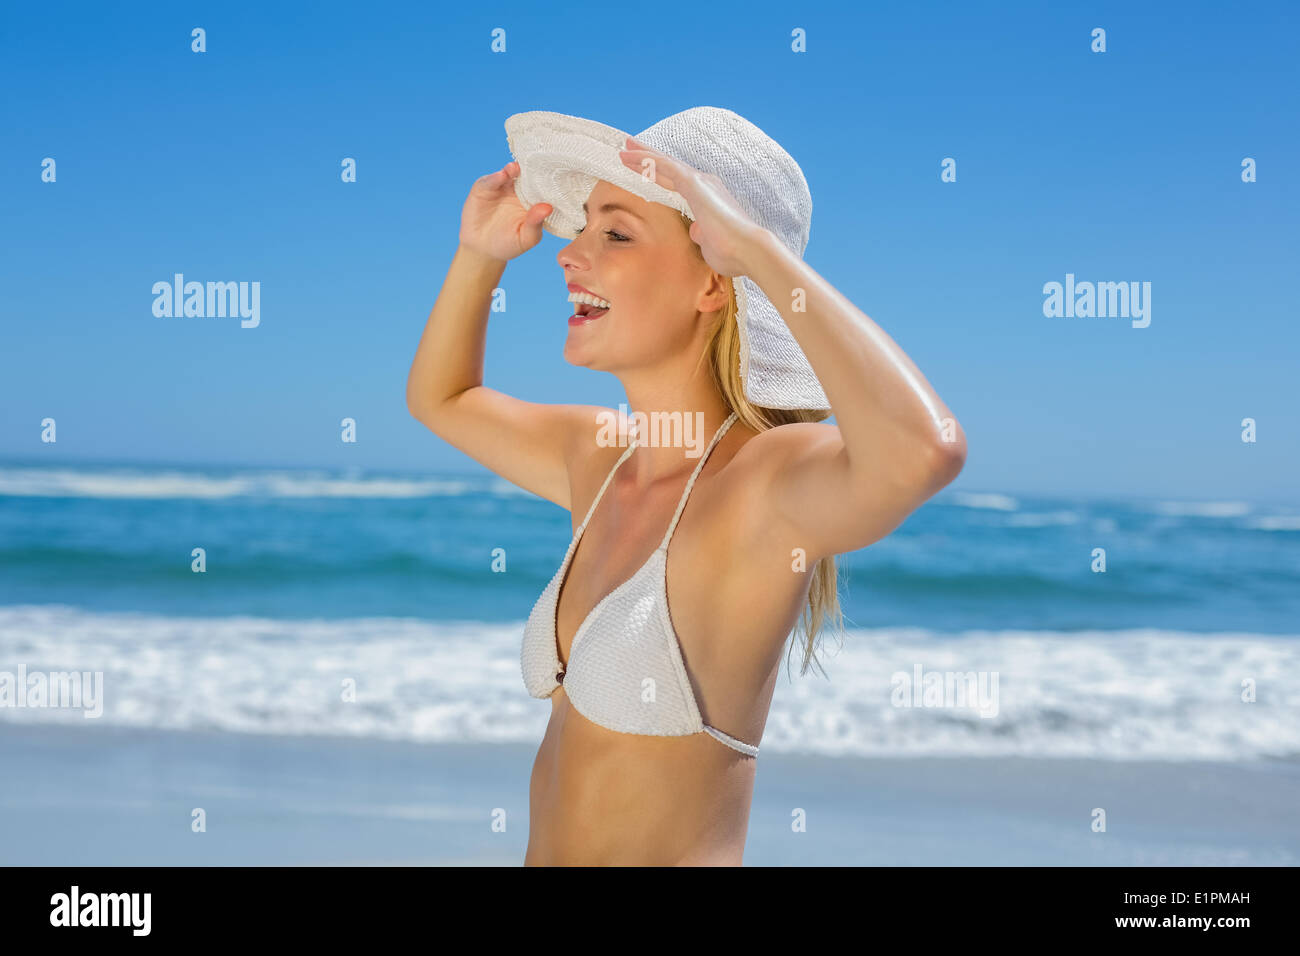 Beautiful Smiling Woman Wearing Red Thongs and Black Bikini Posing on the  Sea Beach at Bright Sunny Day Against Ocean Stock Image - Image of idyllic,  attractive: 147857111